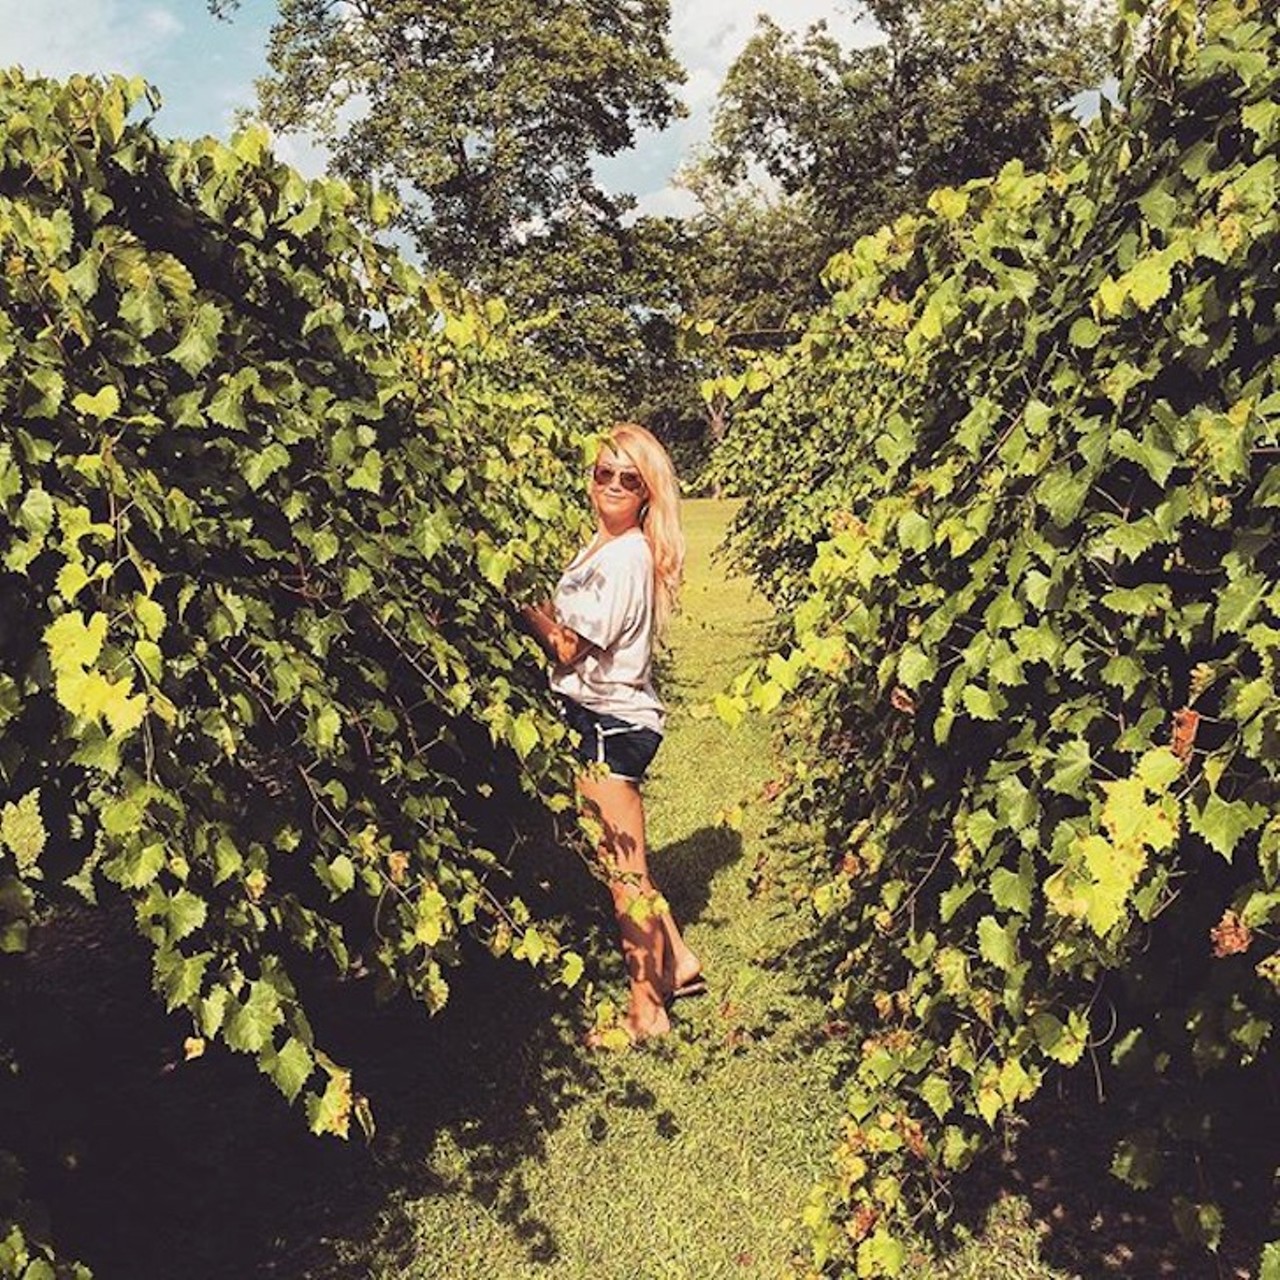 Chautauqua Vineyards & Winery
364 Hugh Adams Road, DeFuniak Springs | 850-892-5887
If you find yourself in the Florida Panhandle, stop by this winery for free daily wine tastings and tours. 
Photo via ksydxoxoxo/Instagram